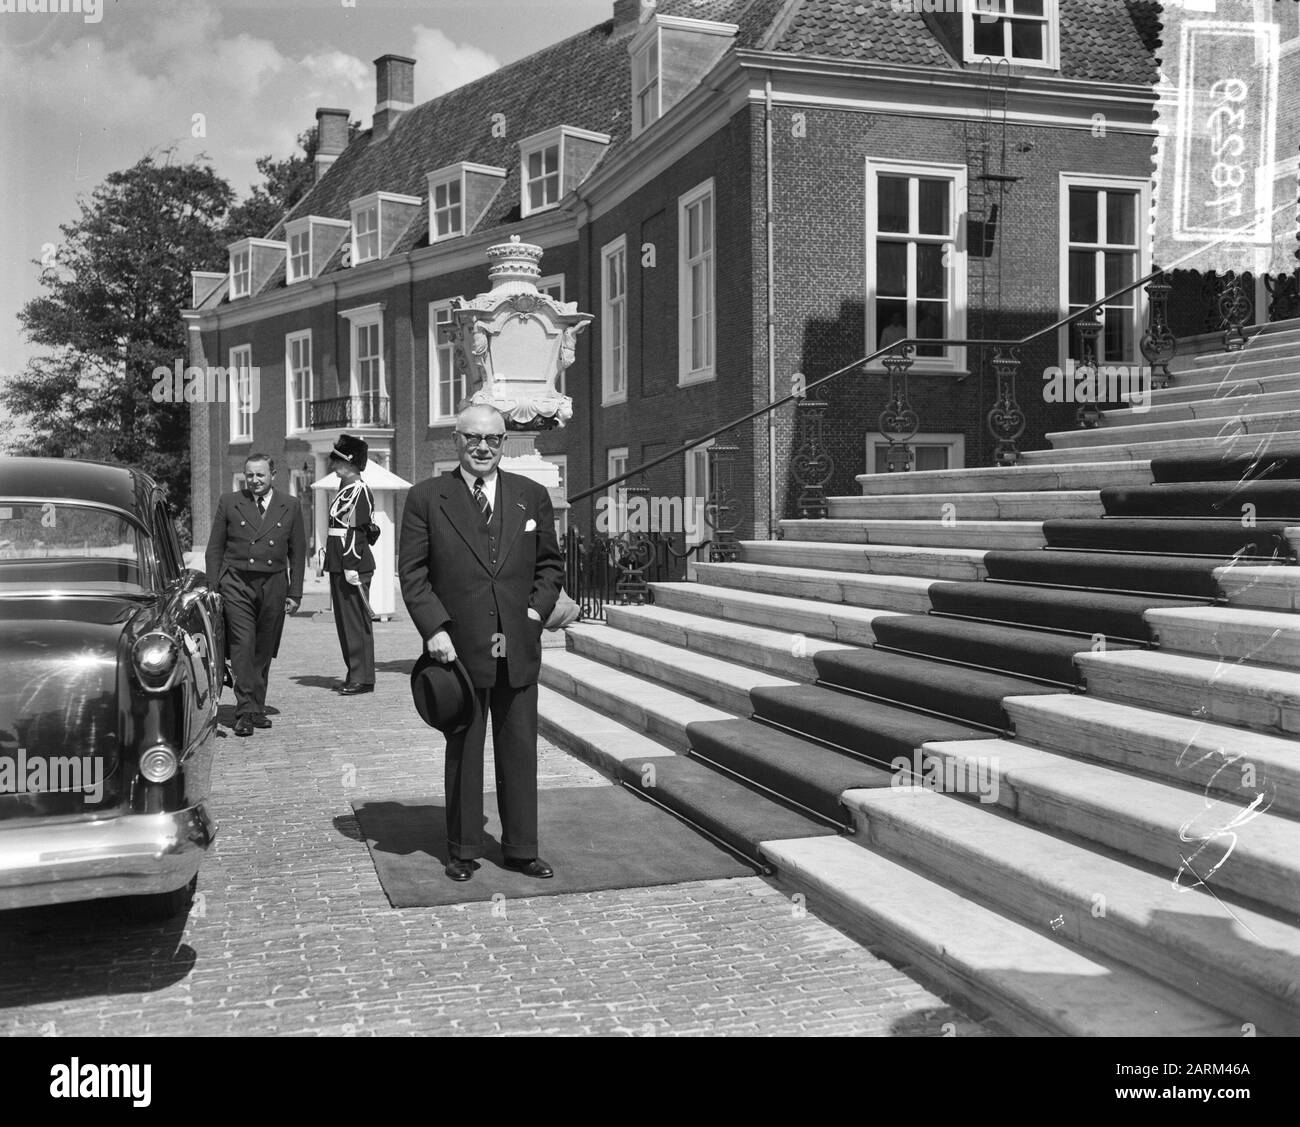 Thursday afternoon H.M. de queen received the advisors for the cabinet formation in The Hague. Dr. L.G. Kortenhorst, President of the House of Representatives, upon arrival at the palace Date: 14 June 1956 Location: The Hague, Zuid-Holland Keywords: cabinet formations, politics, chairmen Personal name: Kortenhorst, L.G. Stock Photo